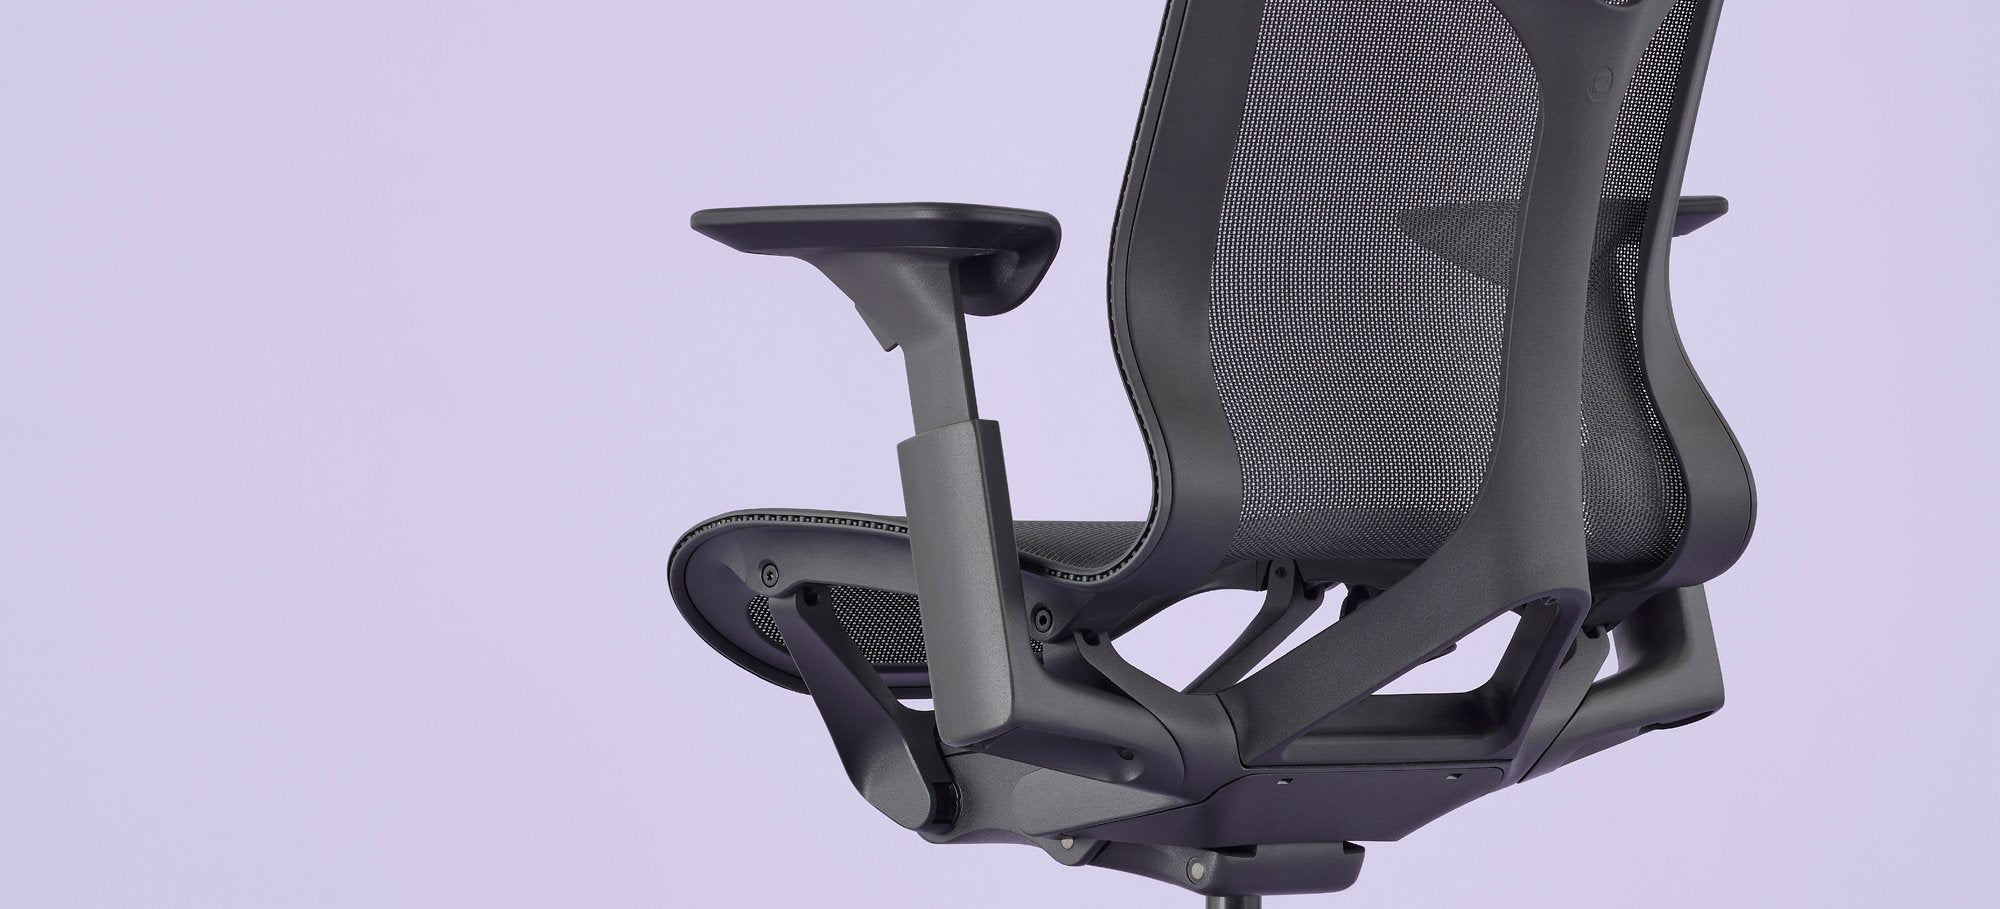 Cosm Office Chair features